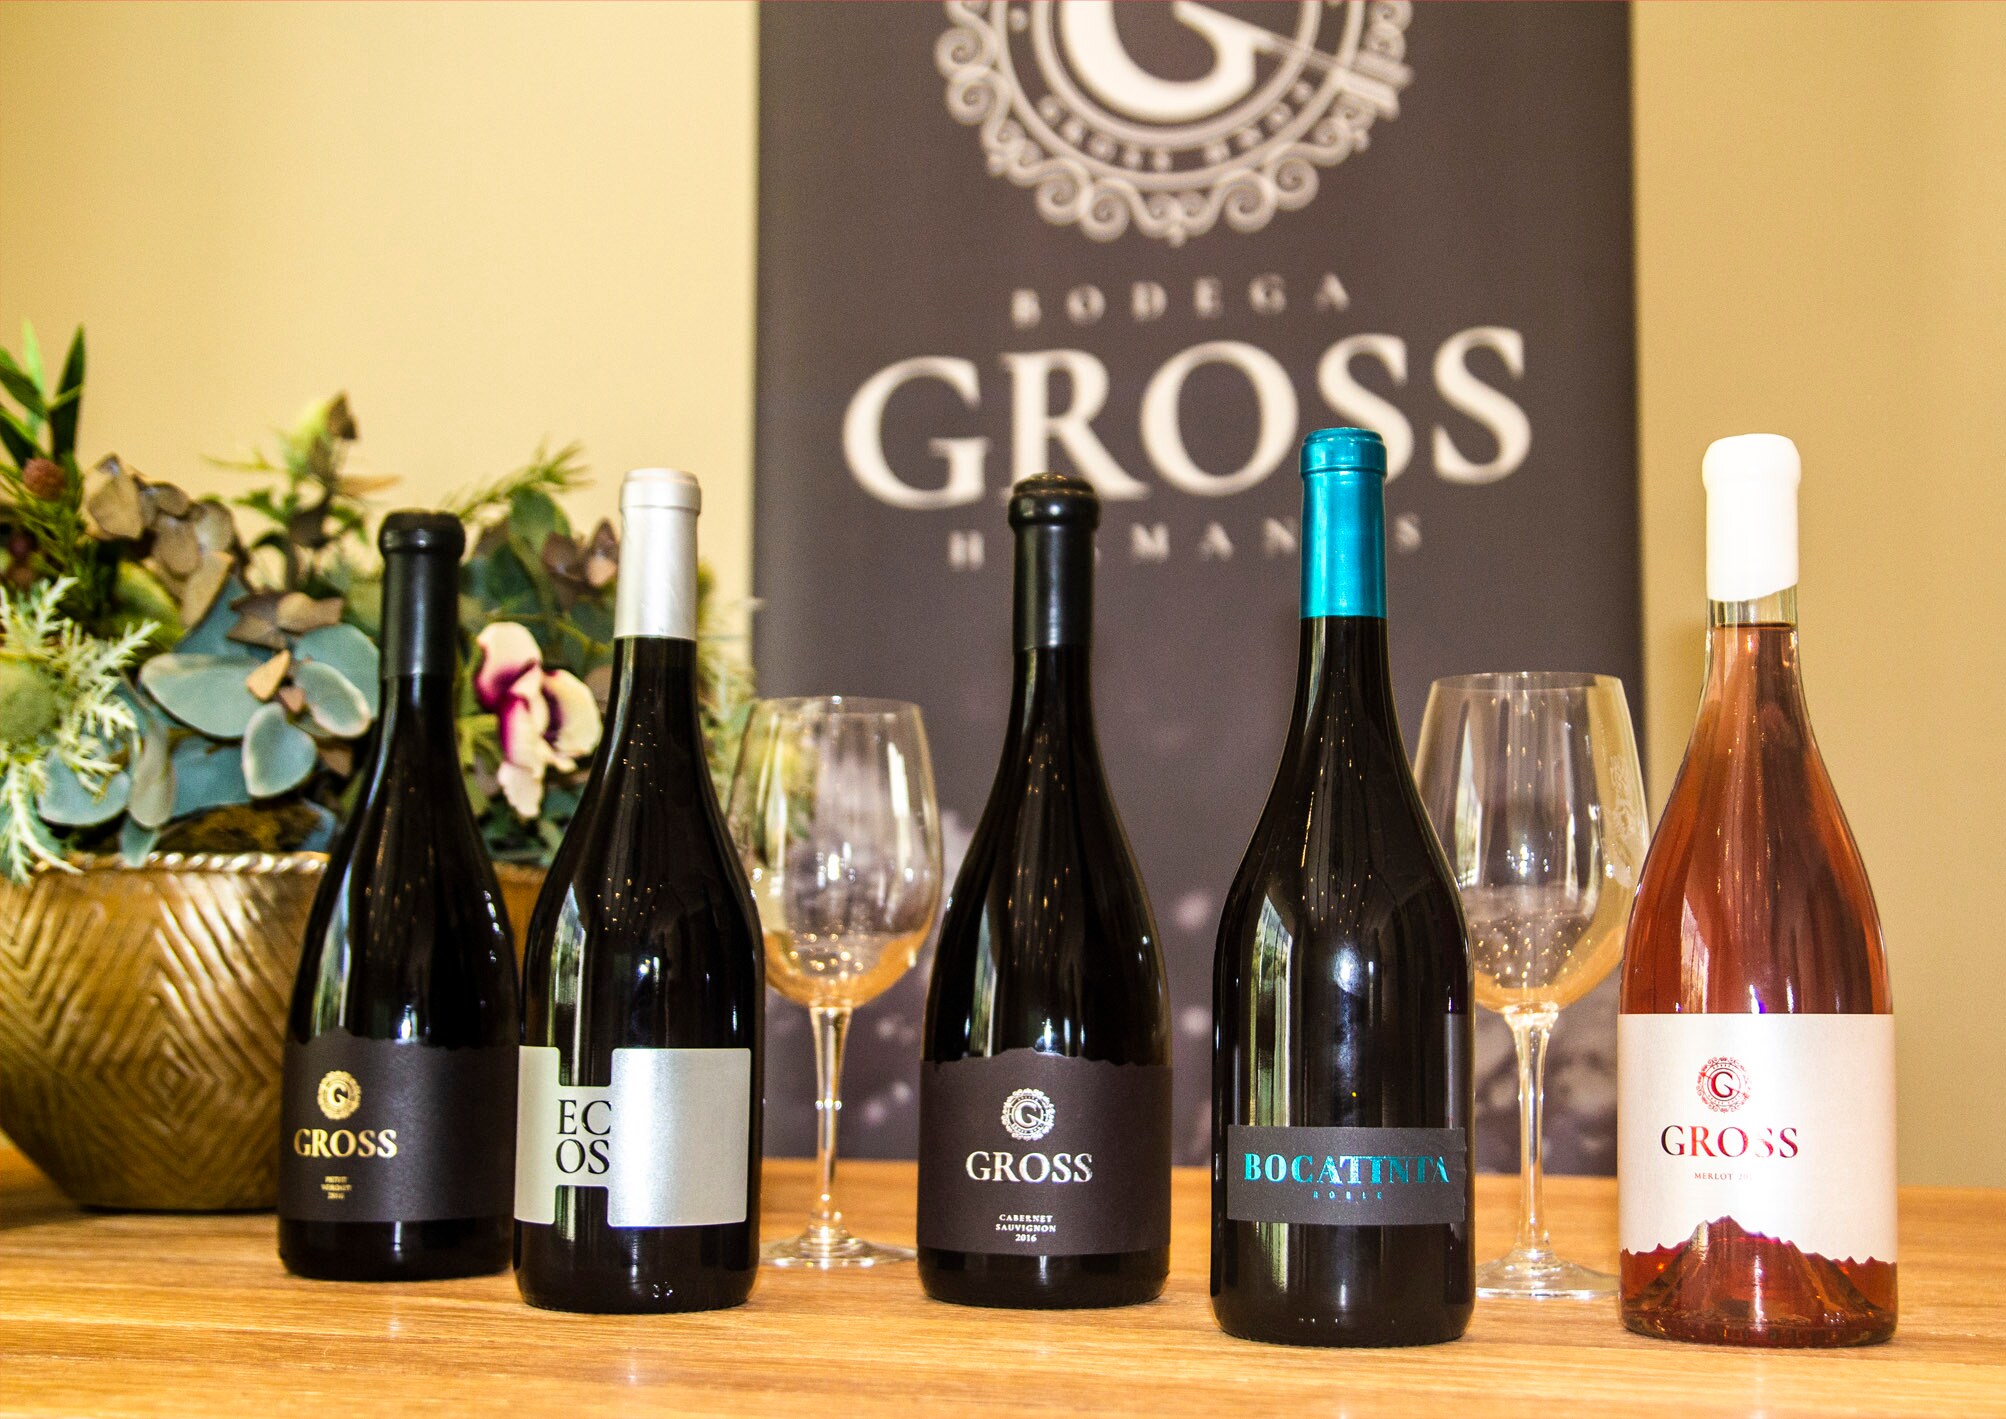 Wines from Bodegas Gross.